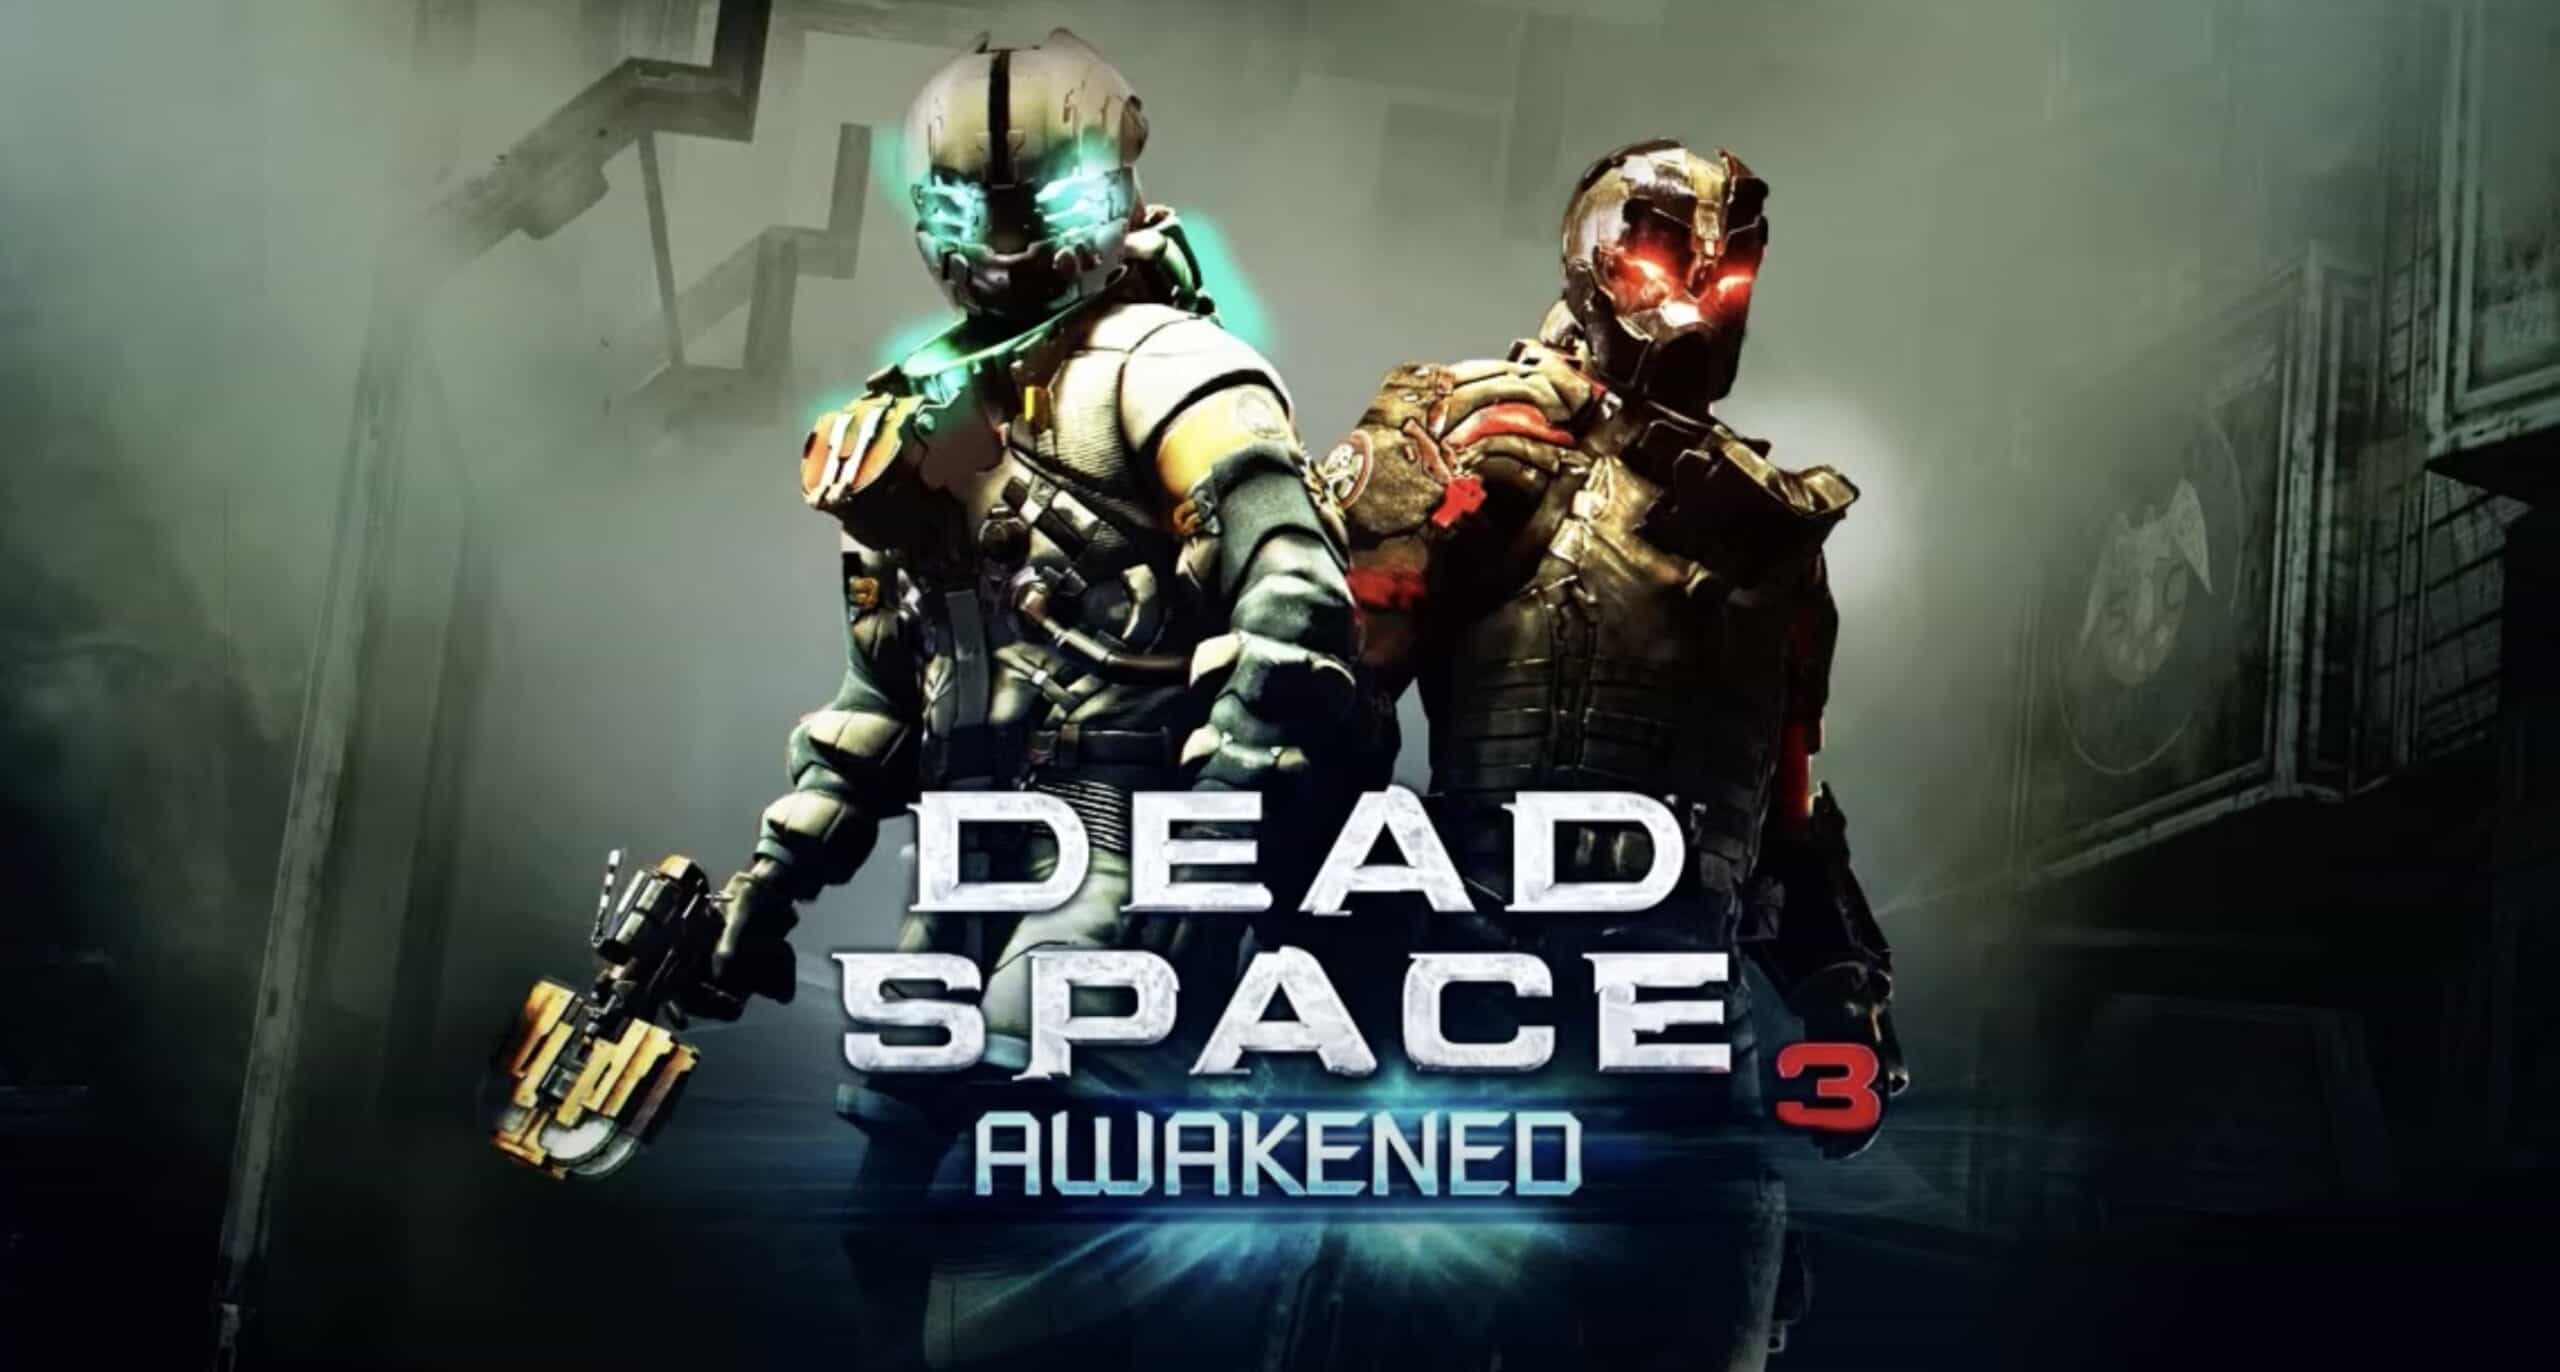 Suit Kiosk, Tips - Dead Space 3 Game Guide